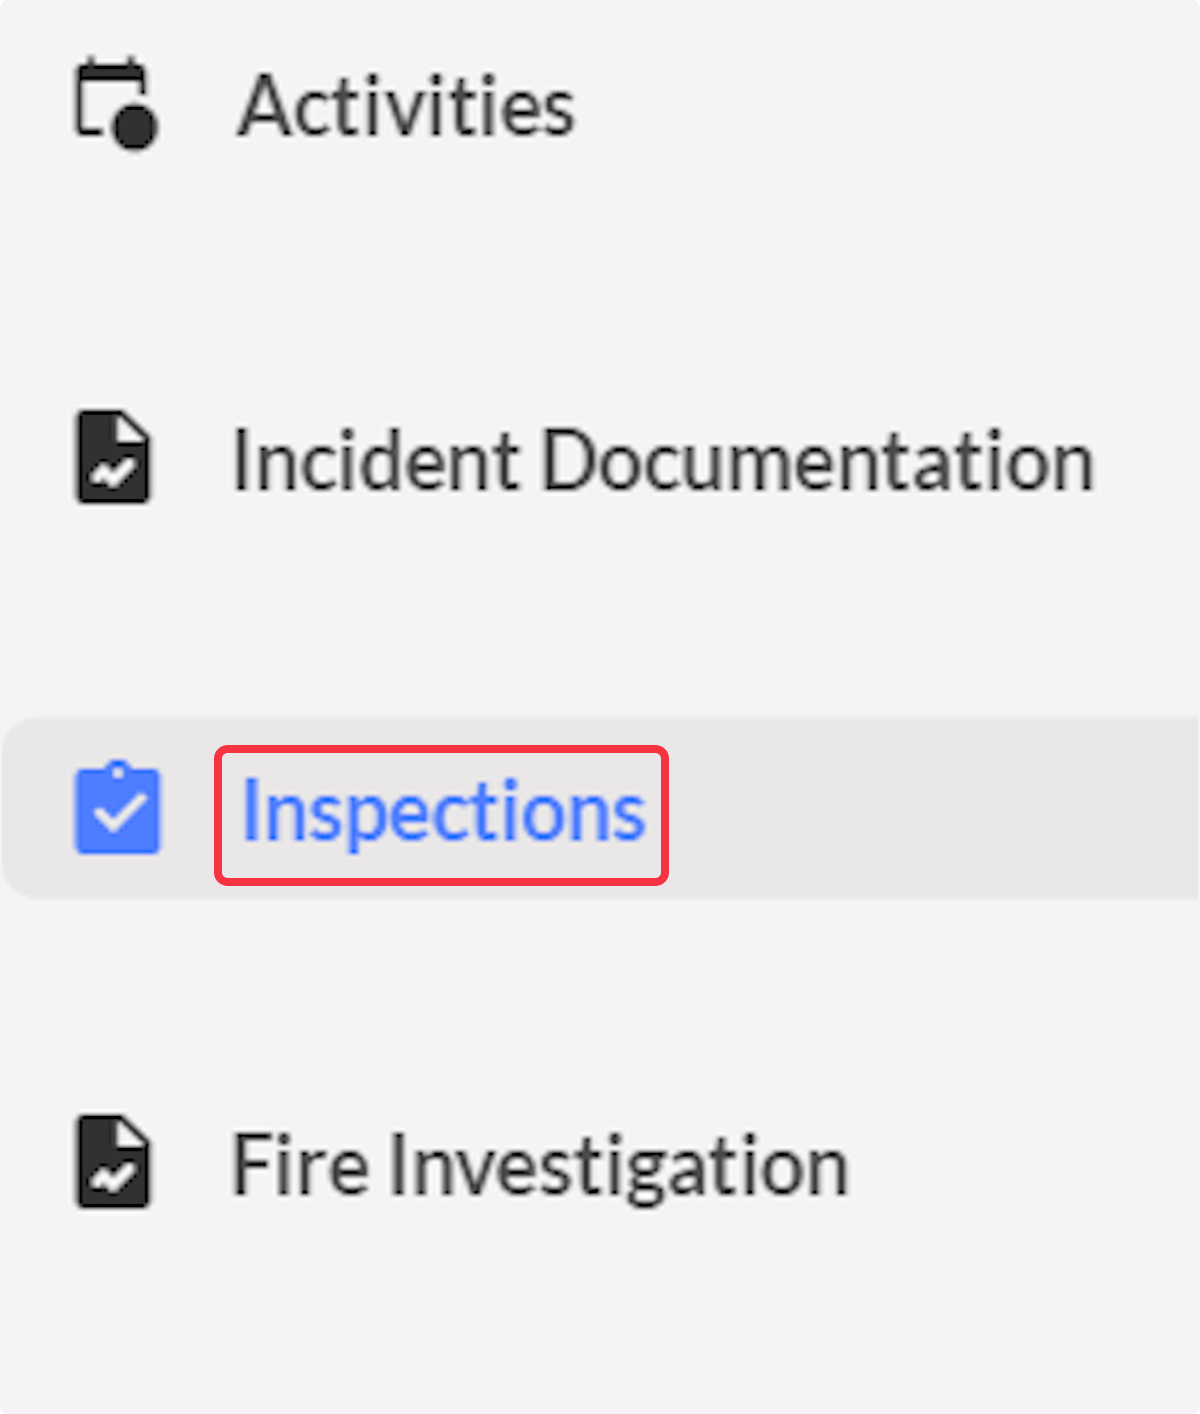 Click on Inspections